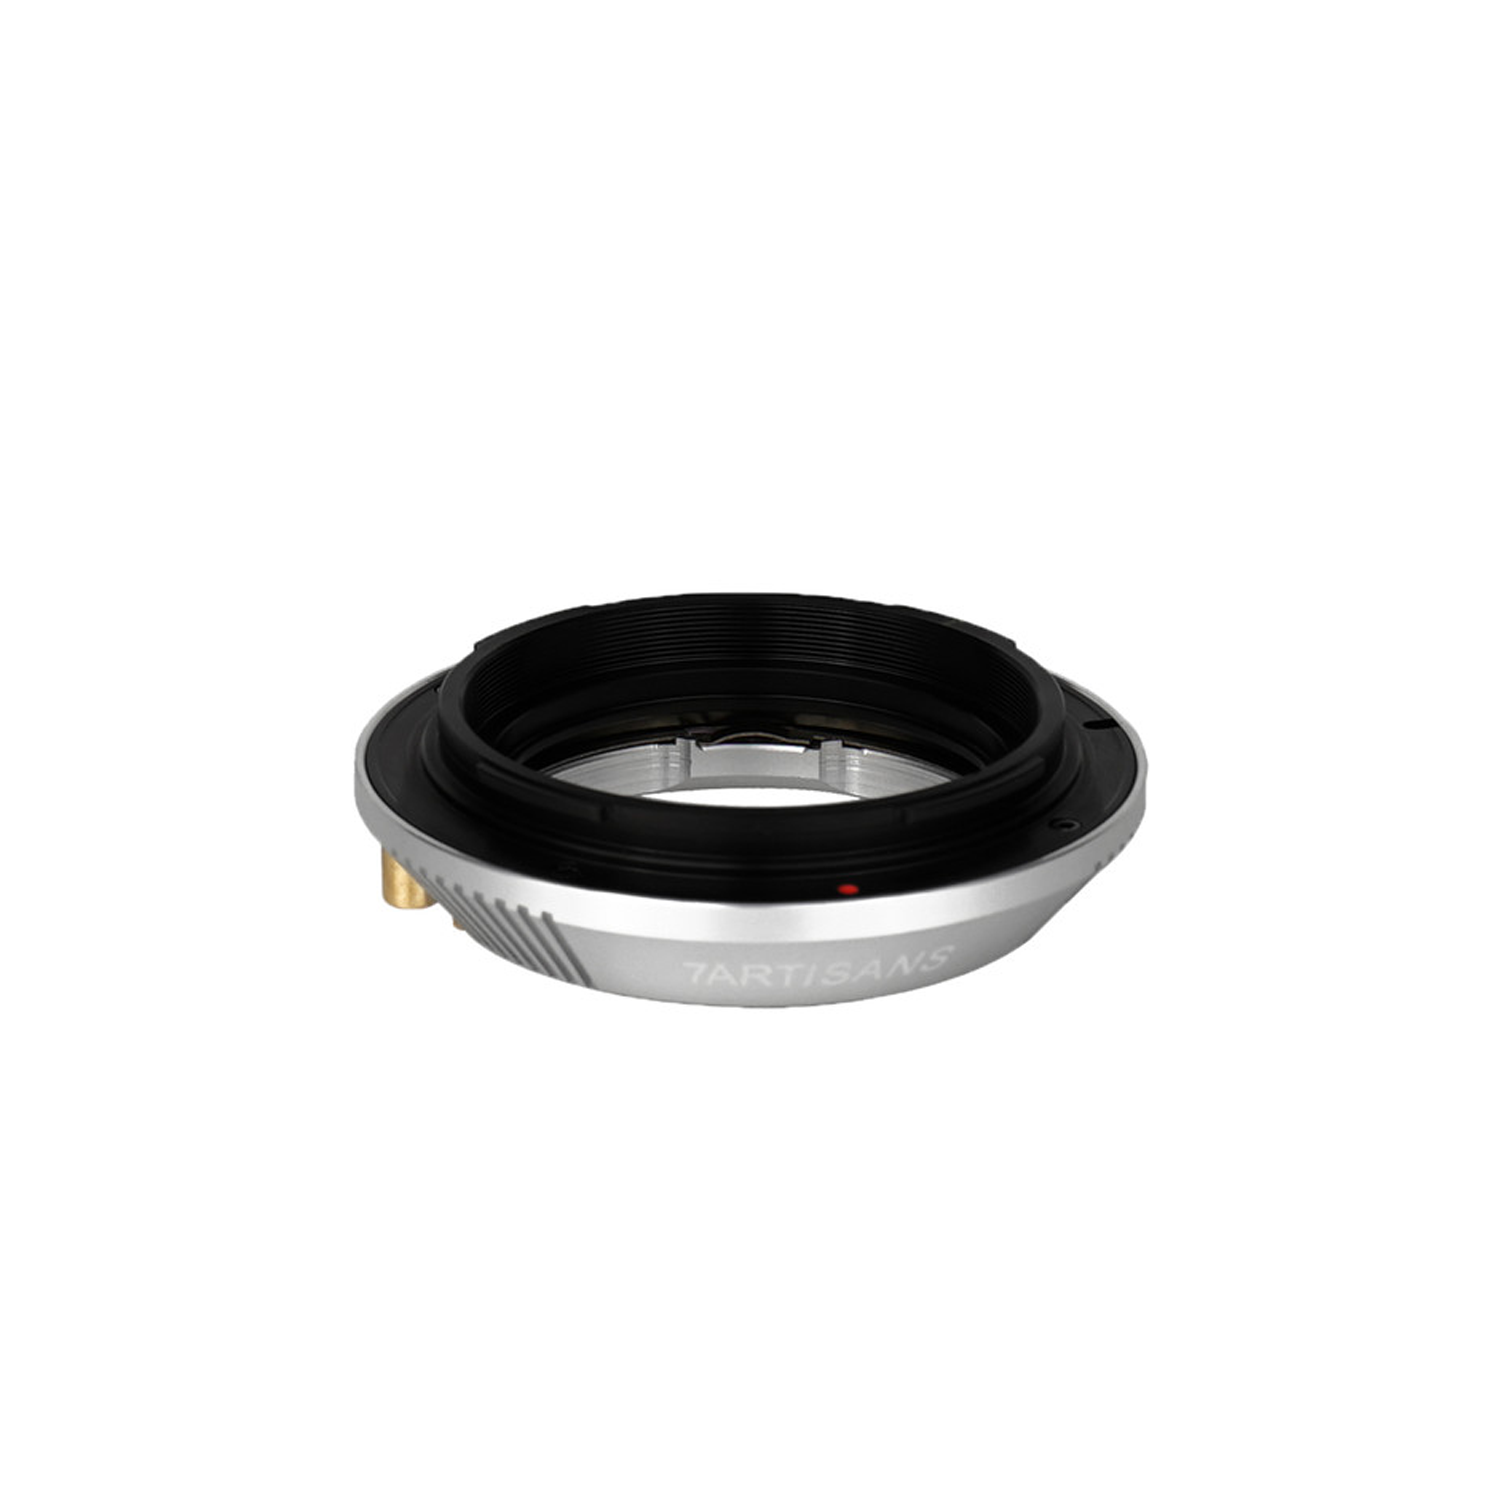 7artisans Photoelectric Transfer Ring for Leica-M Mount Lens to Canon RF-Mount Camera